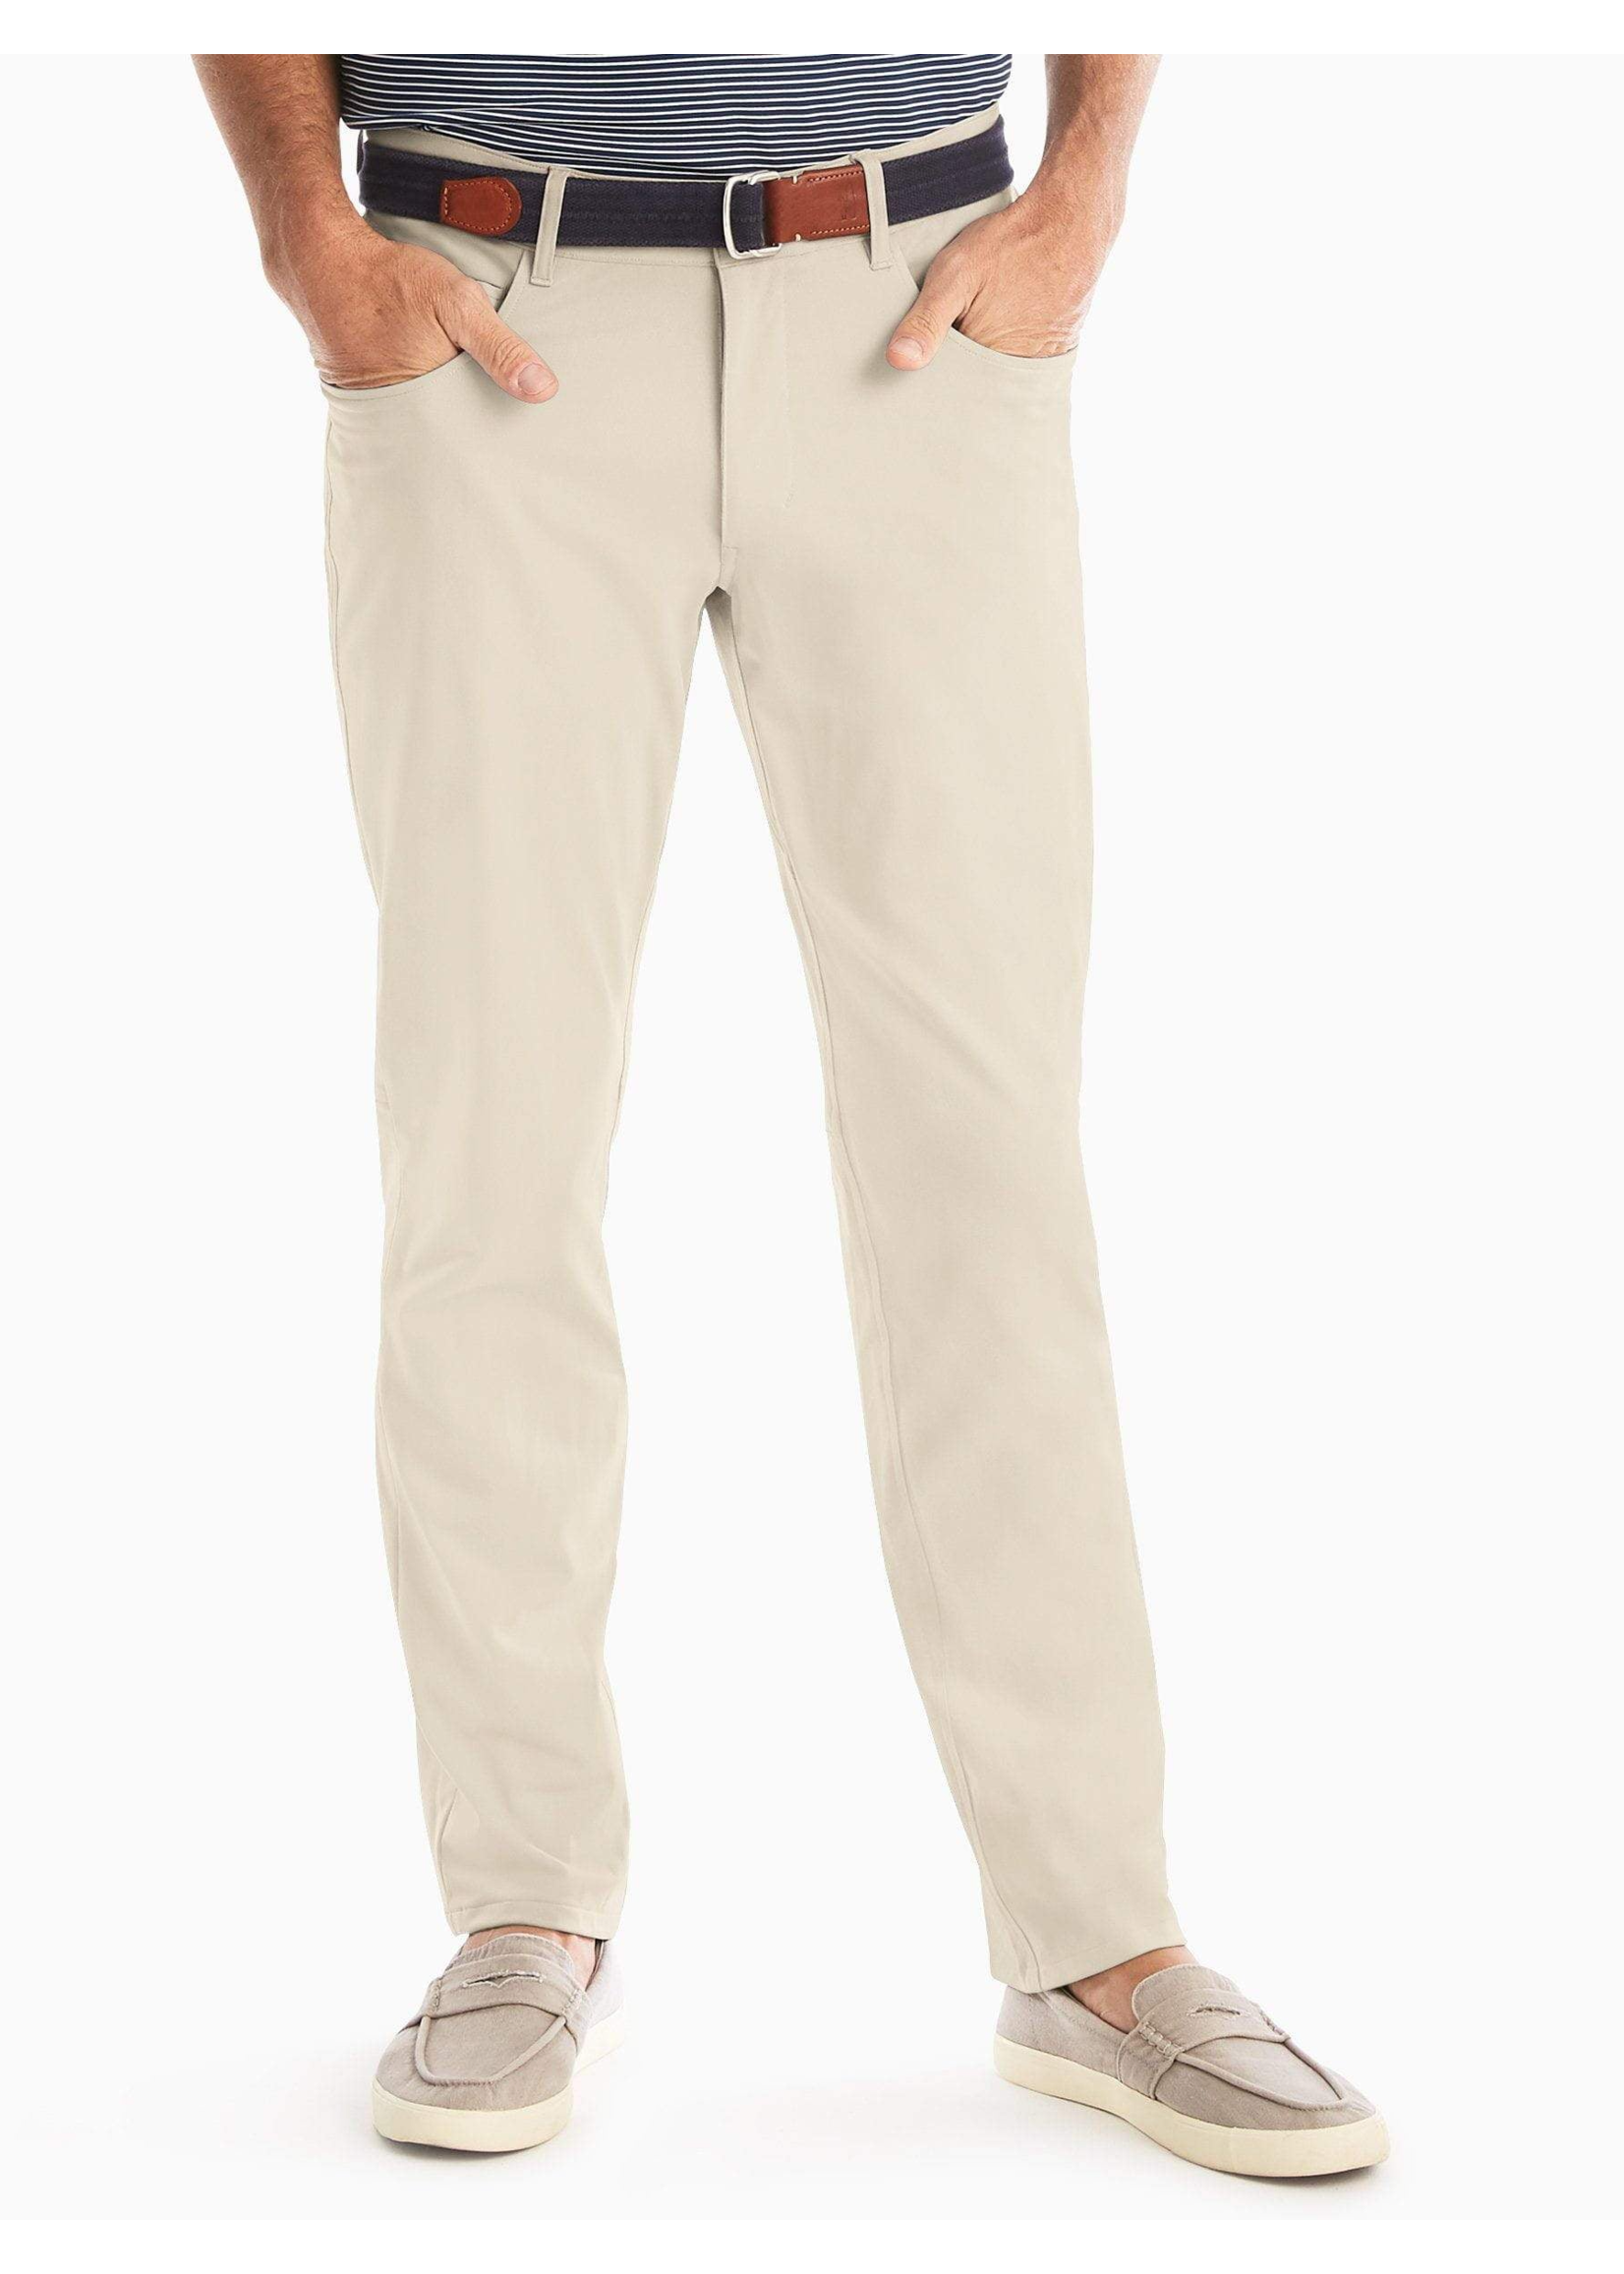 JOHNNIE-O Cross Country Performance Pants